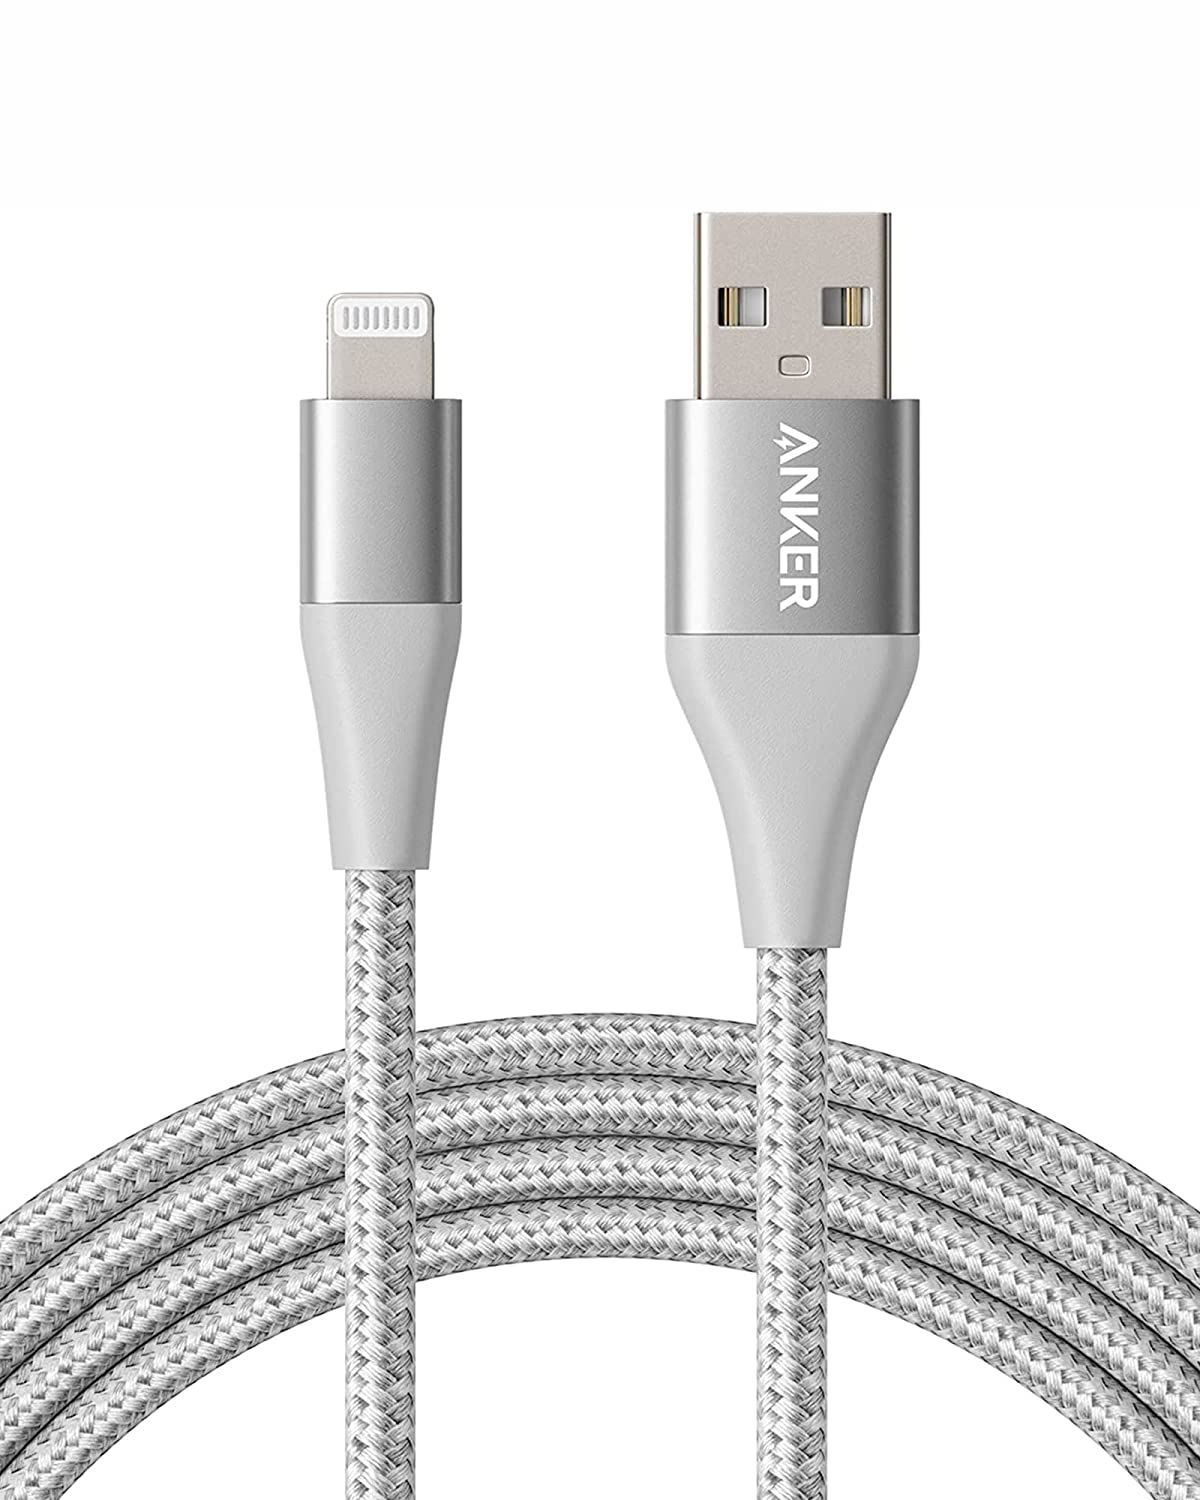 Anker PowerLine+ II USB-A with Lightning Connector 3ft/0.9m A8452H43 - Silver